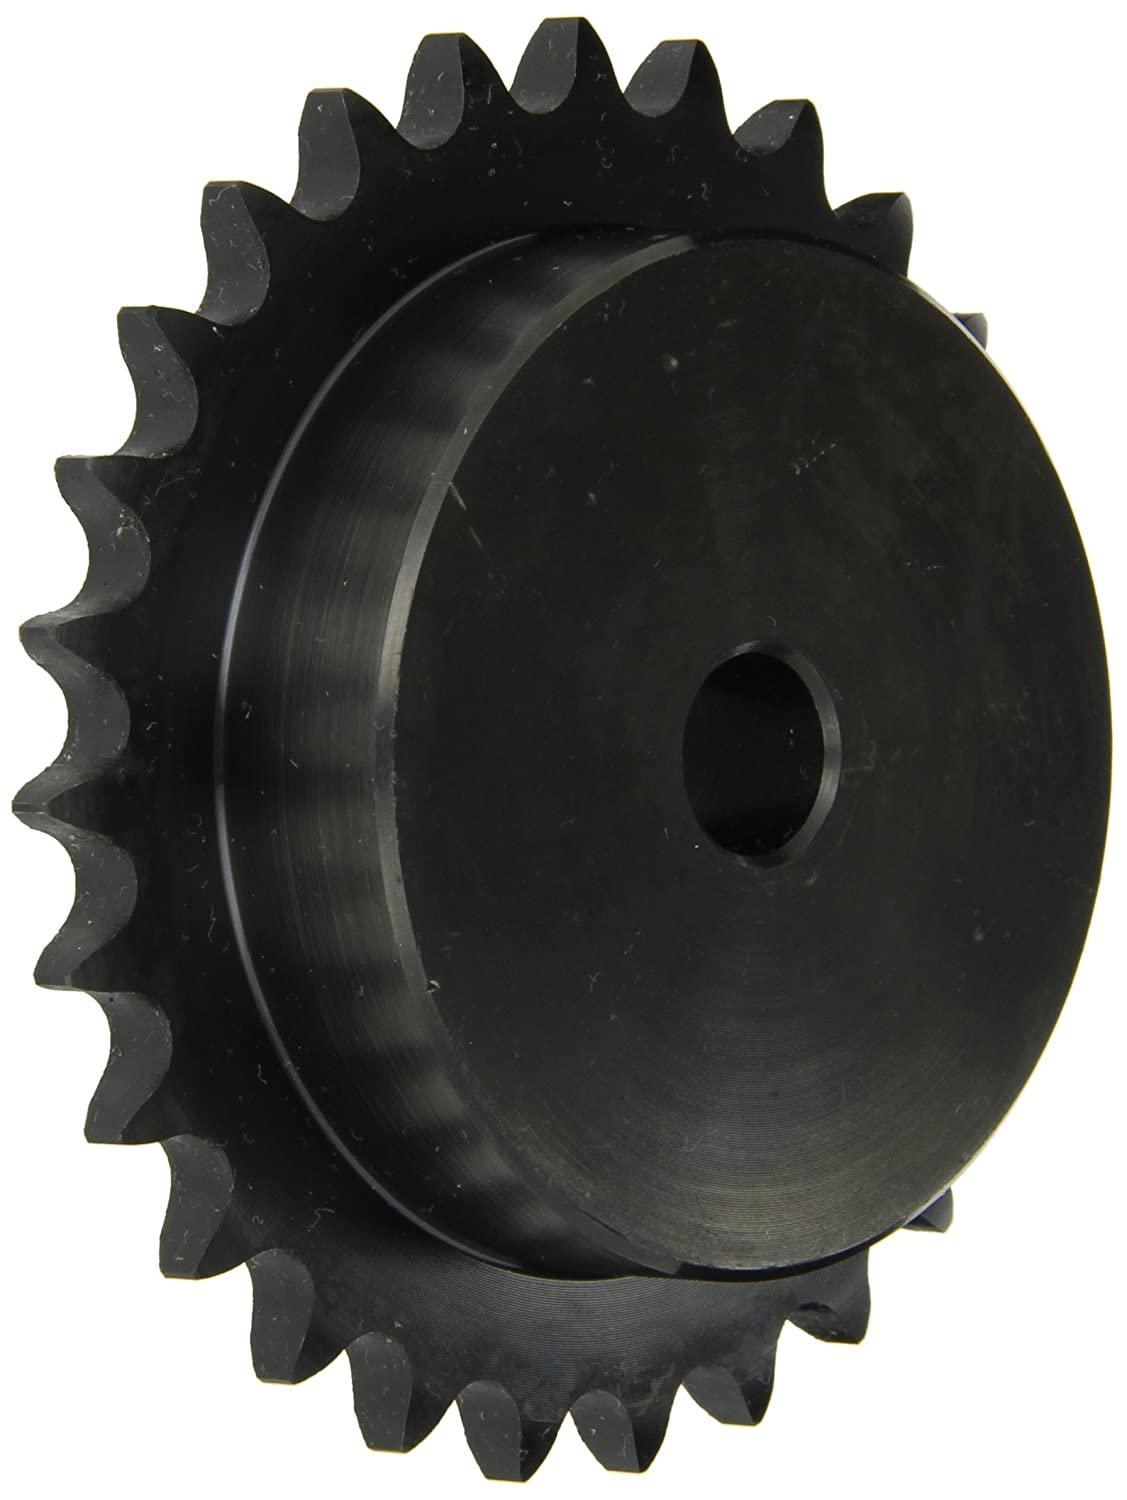 100B48 Roller Chain Sprocket With Stock Bore - Forces Inc